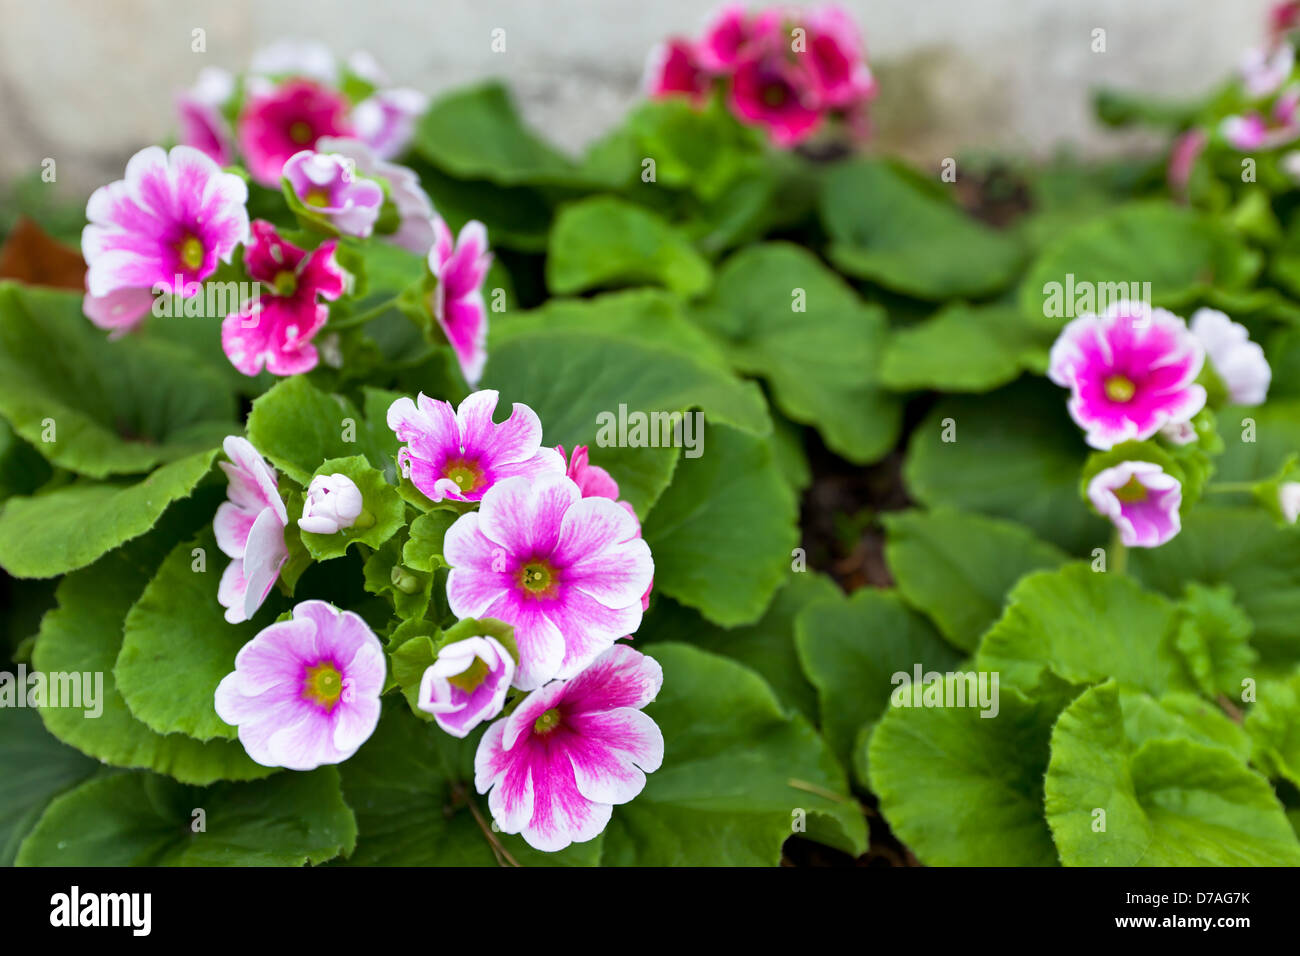 Primula obconica bright pink flowers at outdoor flowerbed Stock Photo